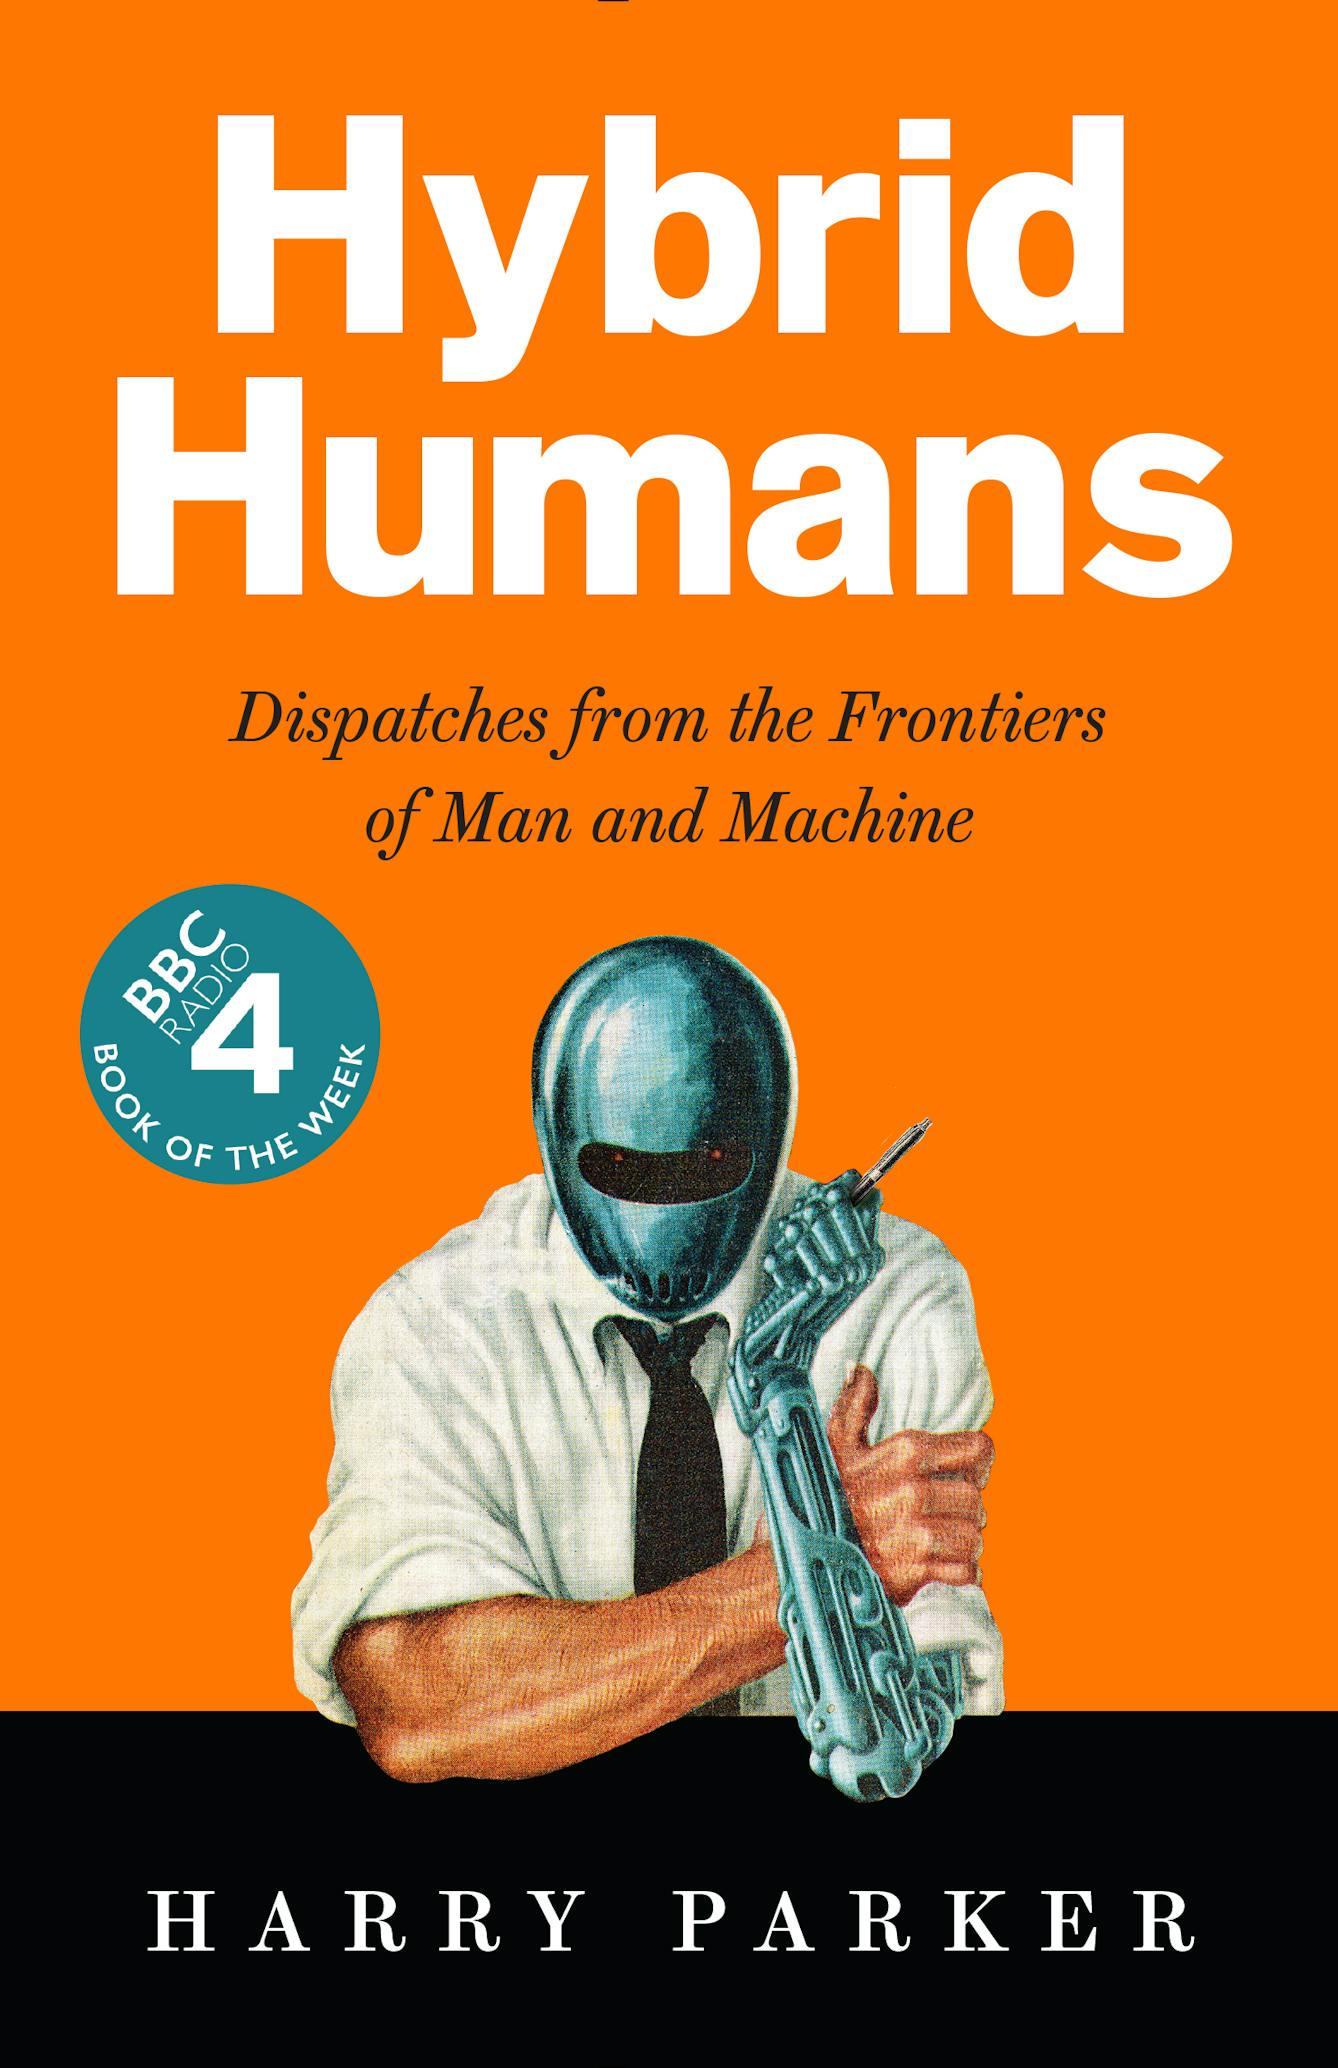 Front cover of the book 'Hybrid Humans'